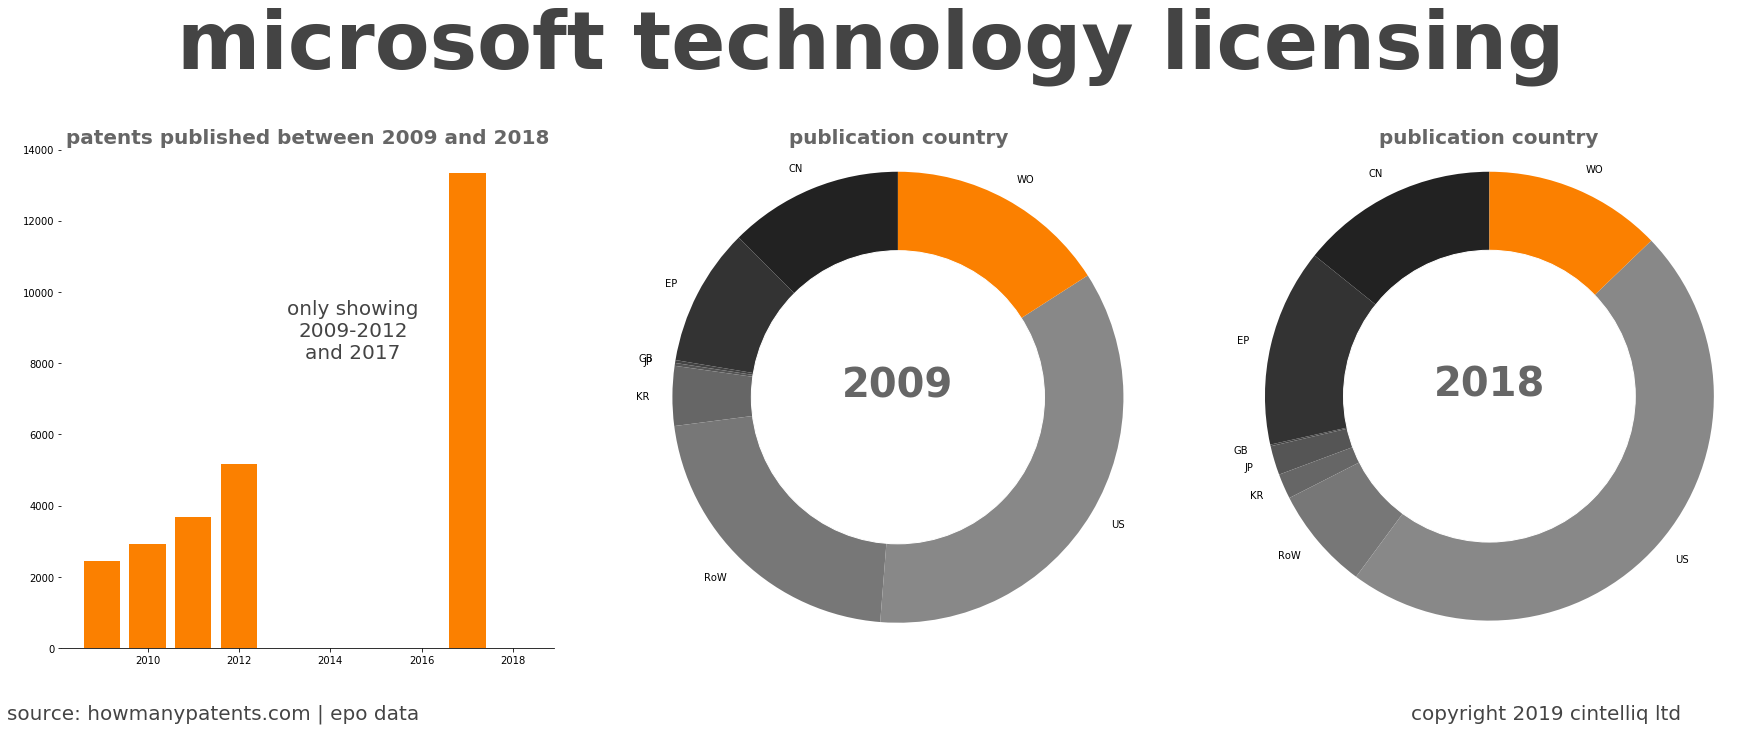 summary of patents for Microsoft Technology Licensing